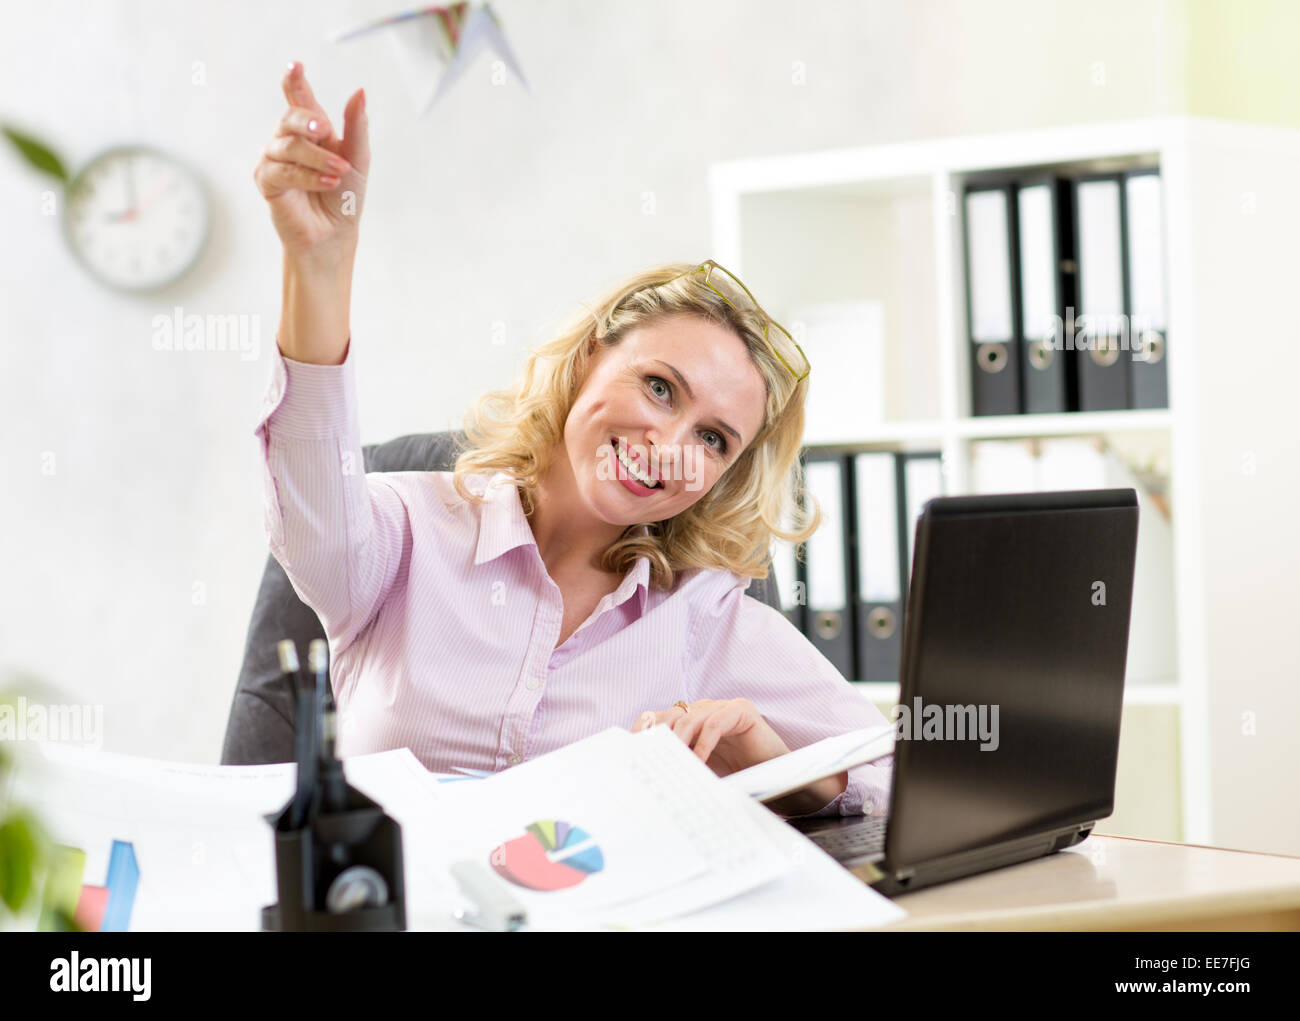 Businesswoman throwing paper airplane in office Banque D'Images